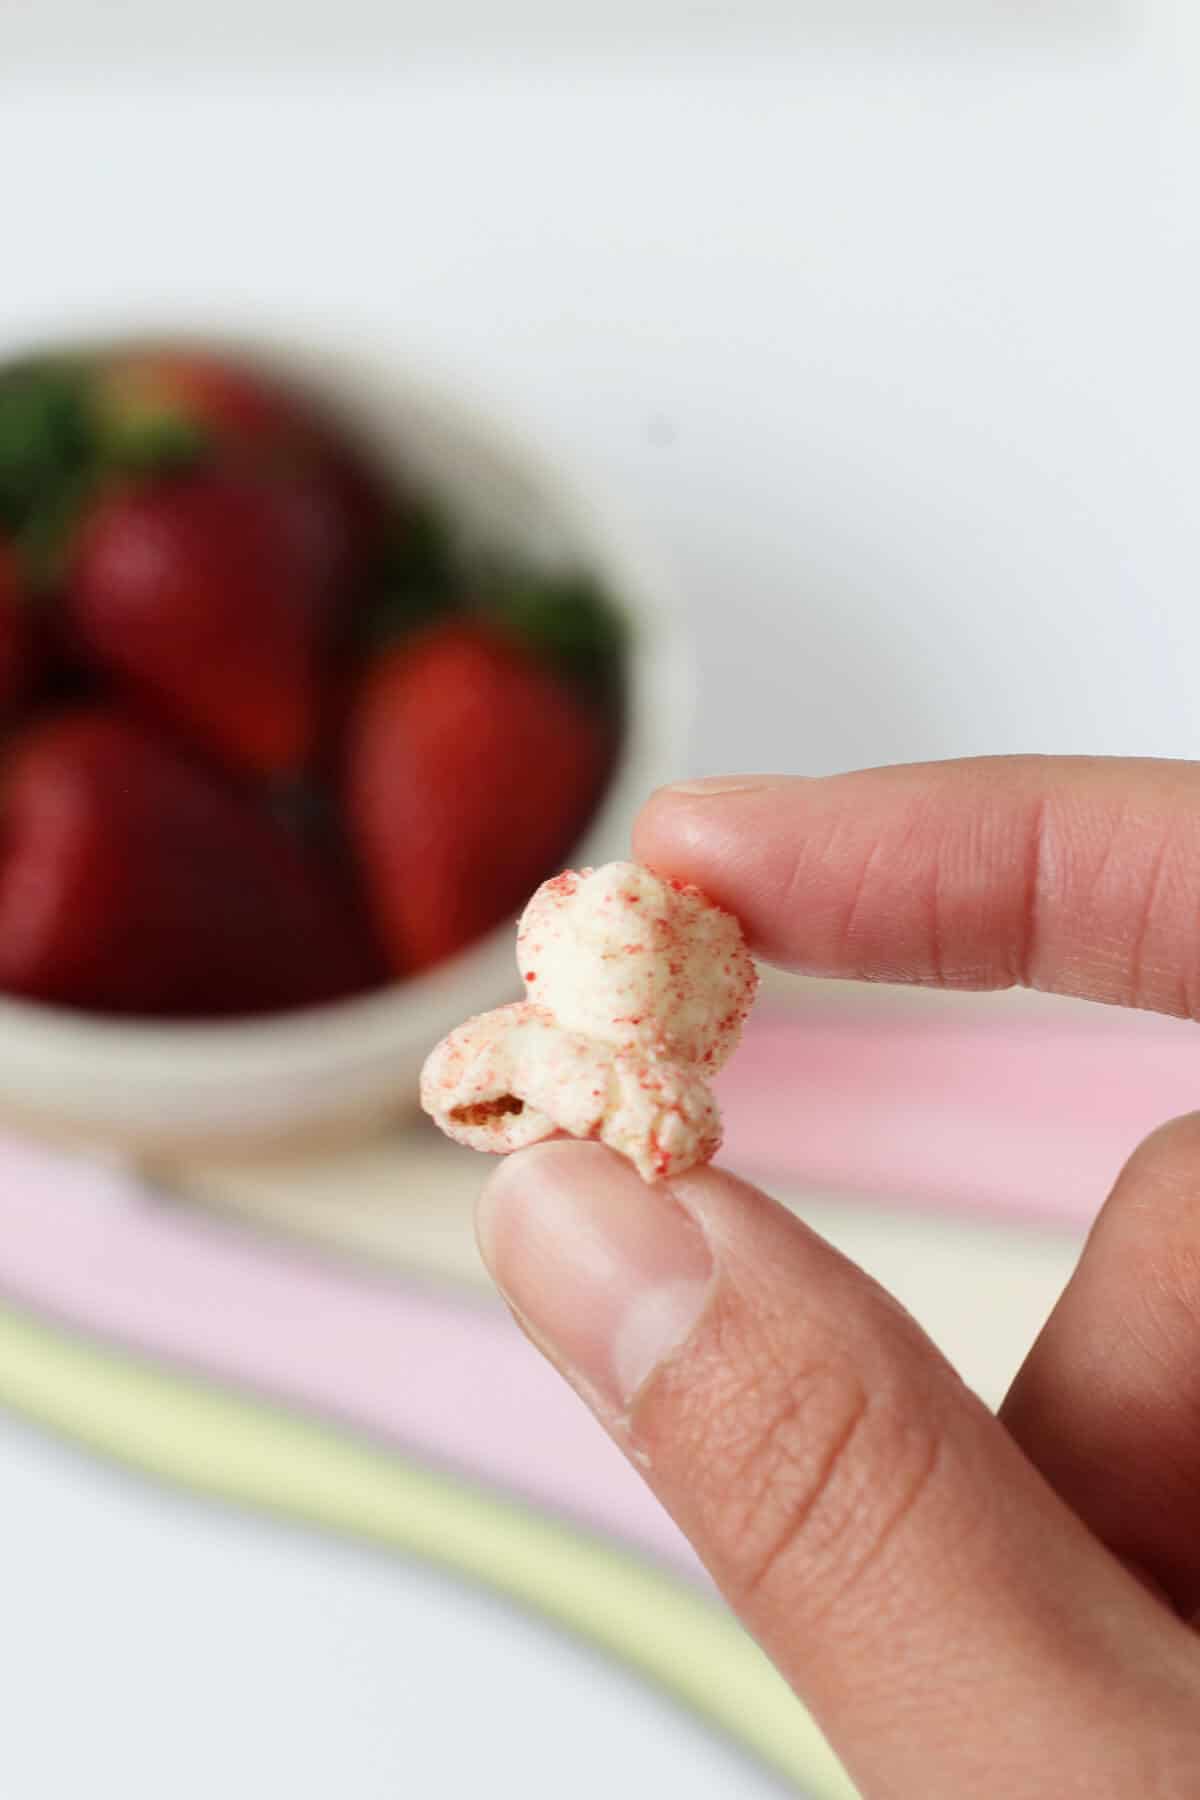 Fingers holding a piece of pink popcorn with a bowl of strawberries in the background.